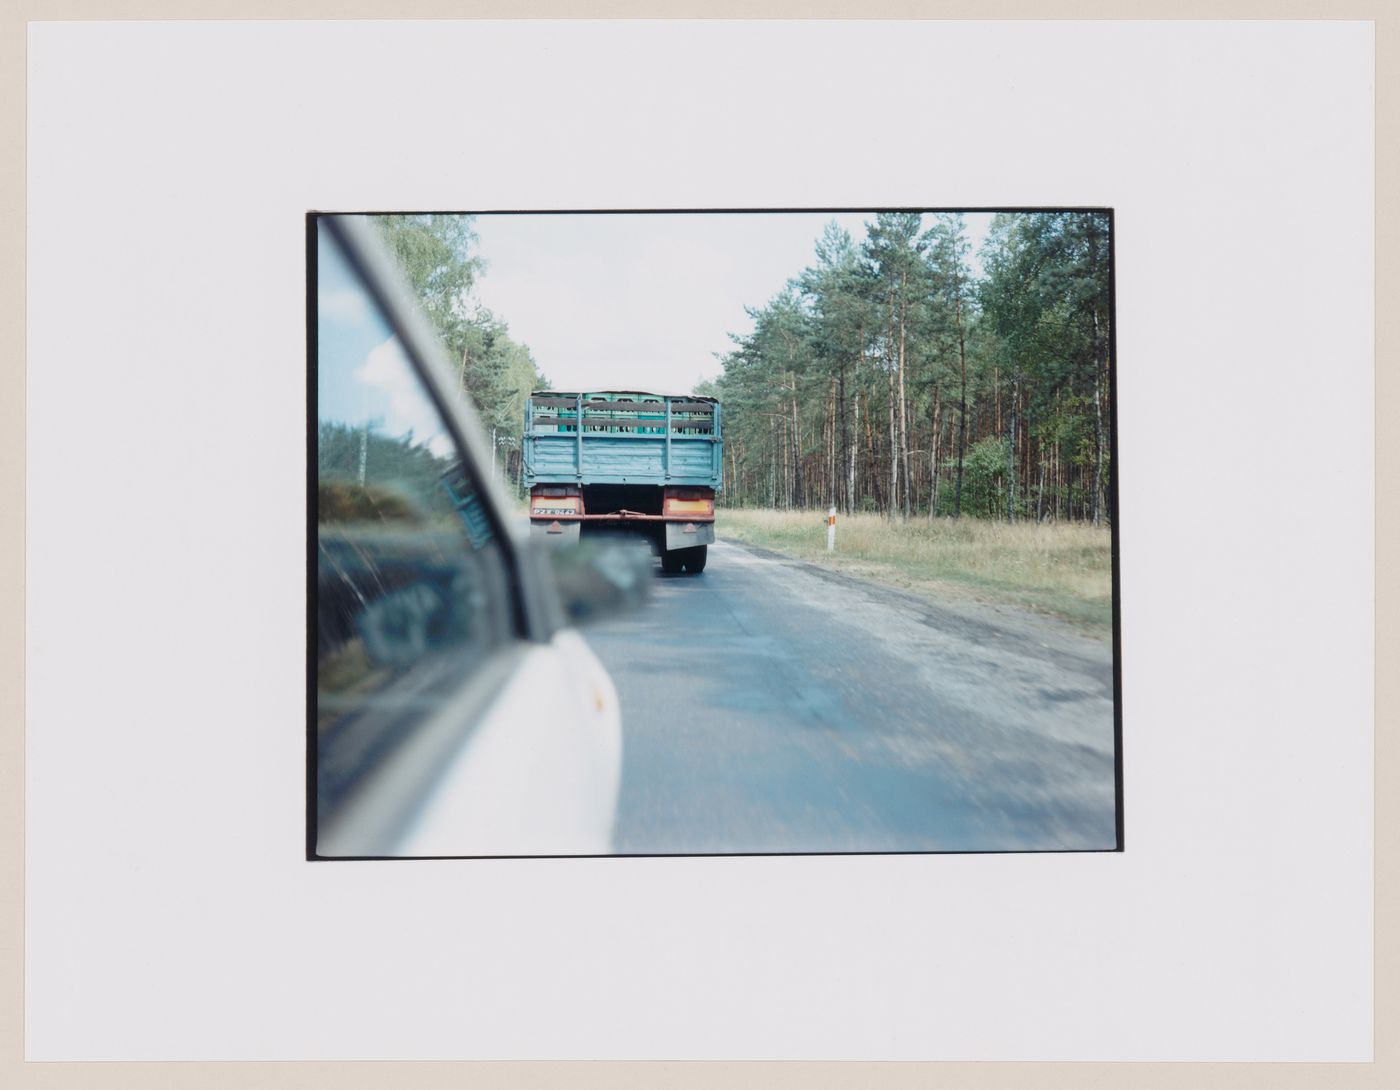 View of a truck on a road and trees at the roadside showing an automobile in the foreground, Dlugie, near Strzelce Kraje'nskie, Poland (from the series "In between cities")